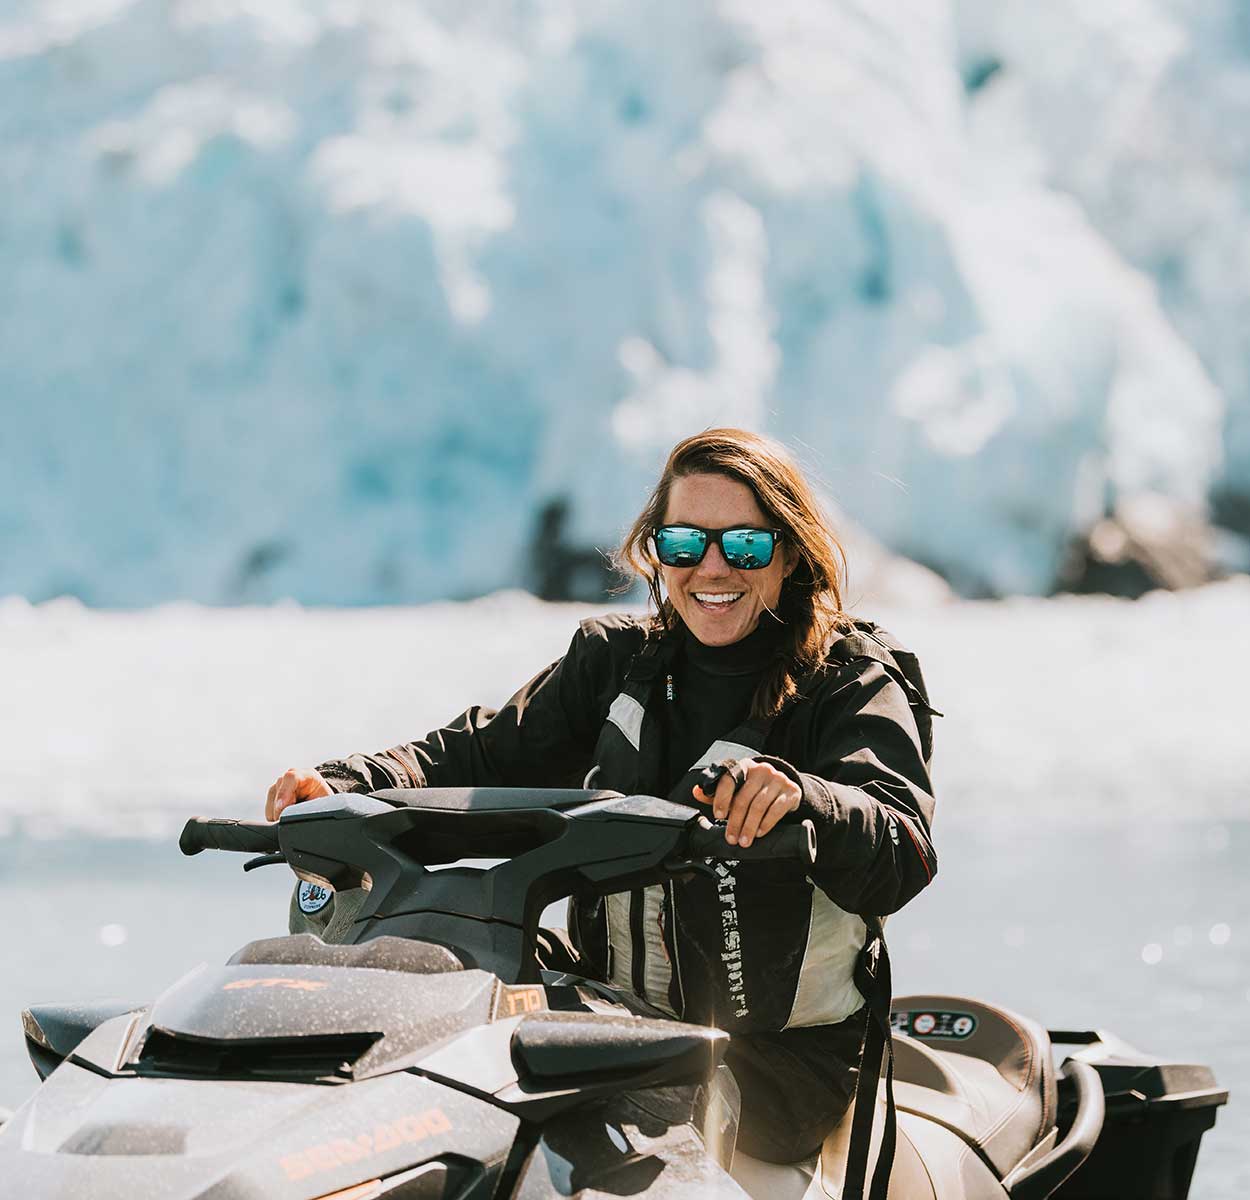 Young Man with Long Hair and Sunglasses Smiling while Riding Jetski